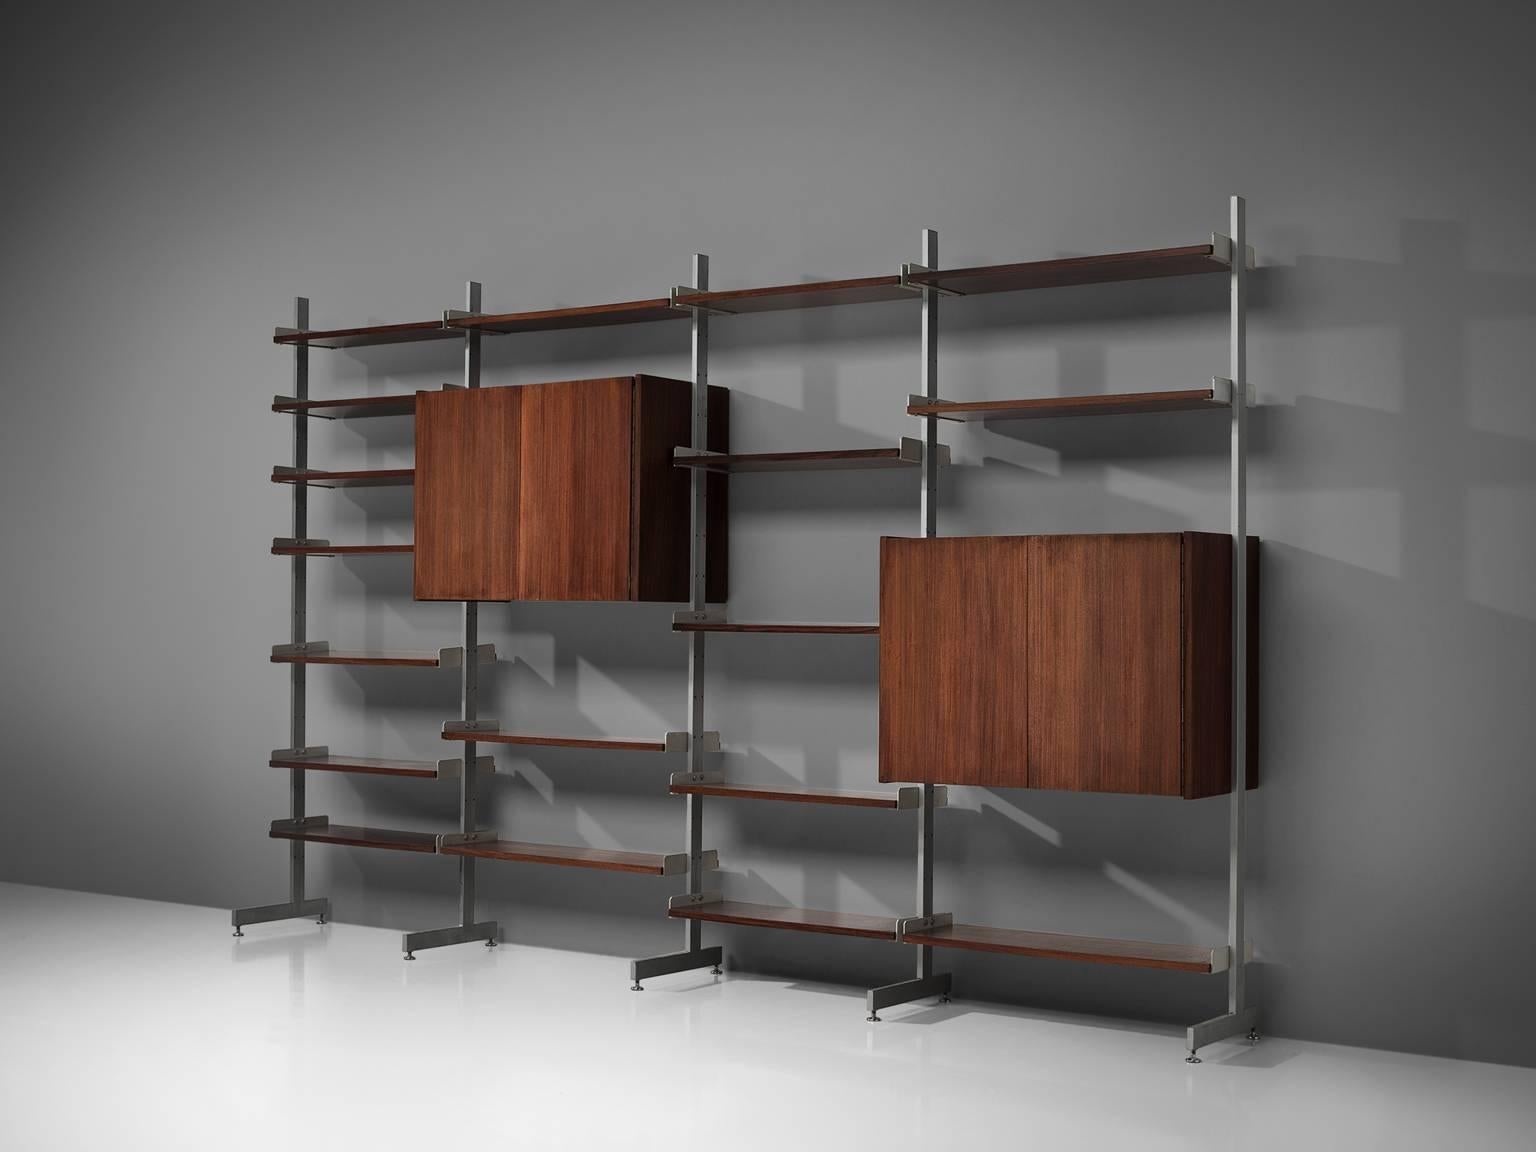 Bookcase or wall unit, aluminum and rosewood, Scandinavia, 1950s.

This wall-mounted shelving unit is four sections large. The order and lay out of this unit is adjustable and can be placed according to your own taste or style. The shelves are